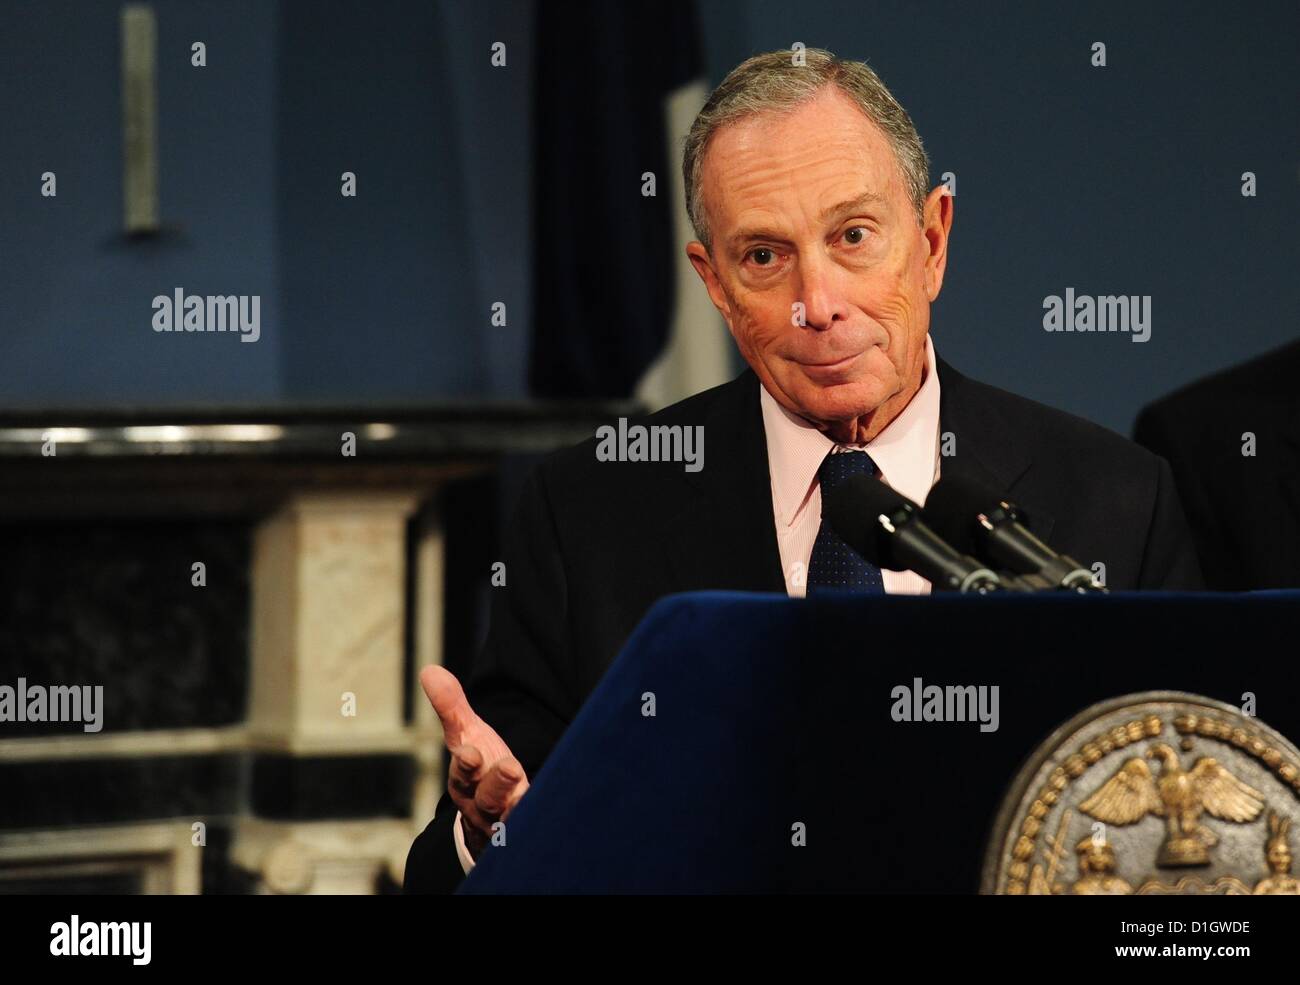 Dec. 21, 2012 - Manhattan, New York, U.S. - Mayor MICHAEL BLOOMBERG discusses the possibility of a yellow bus strike after the holidays at a press conference at City Hall, Friday, December 21, 2012. (Credit Image: © Bryan Smith/ZUMAPRESS.com) Stock Photo